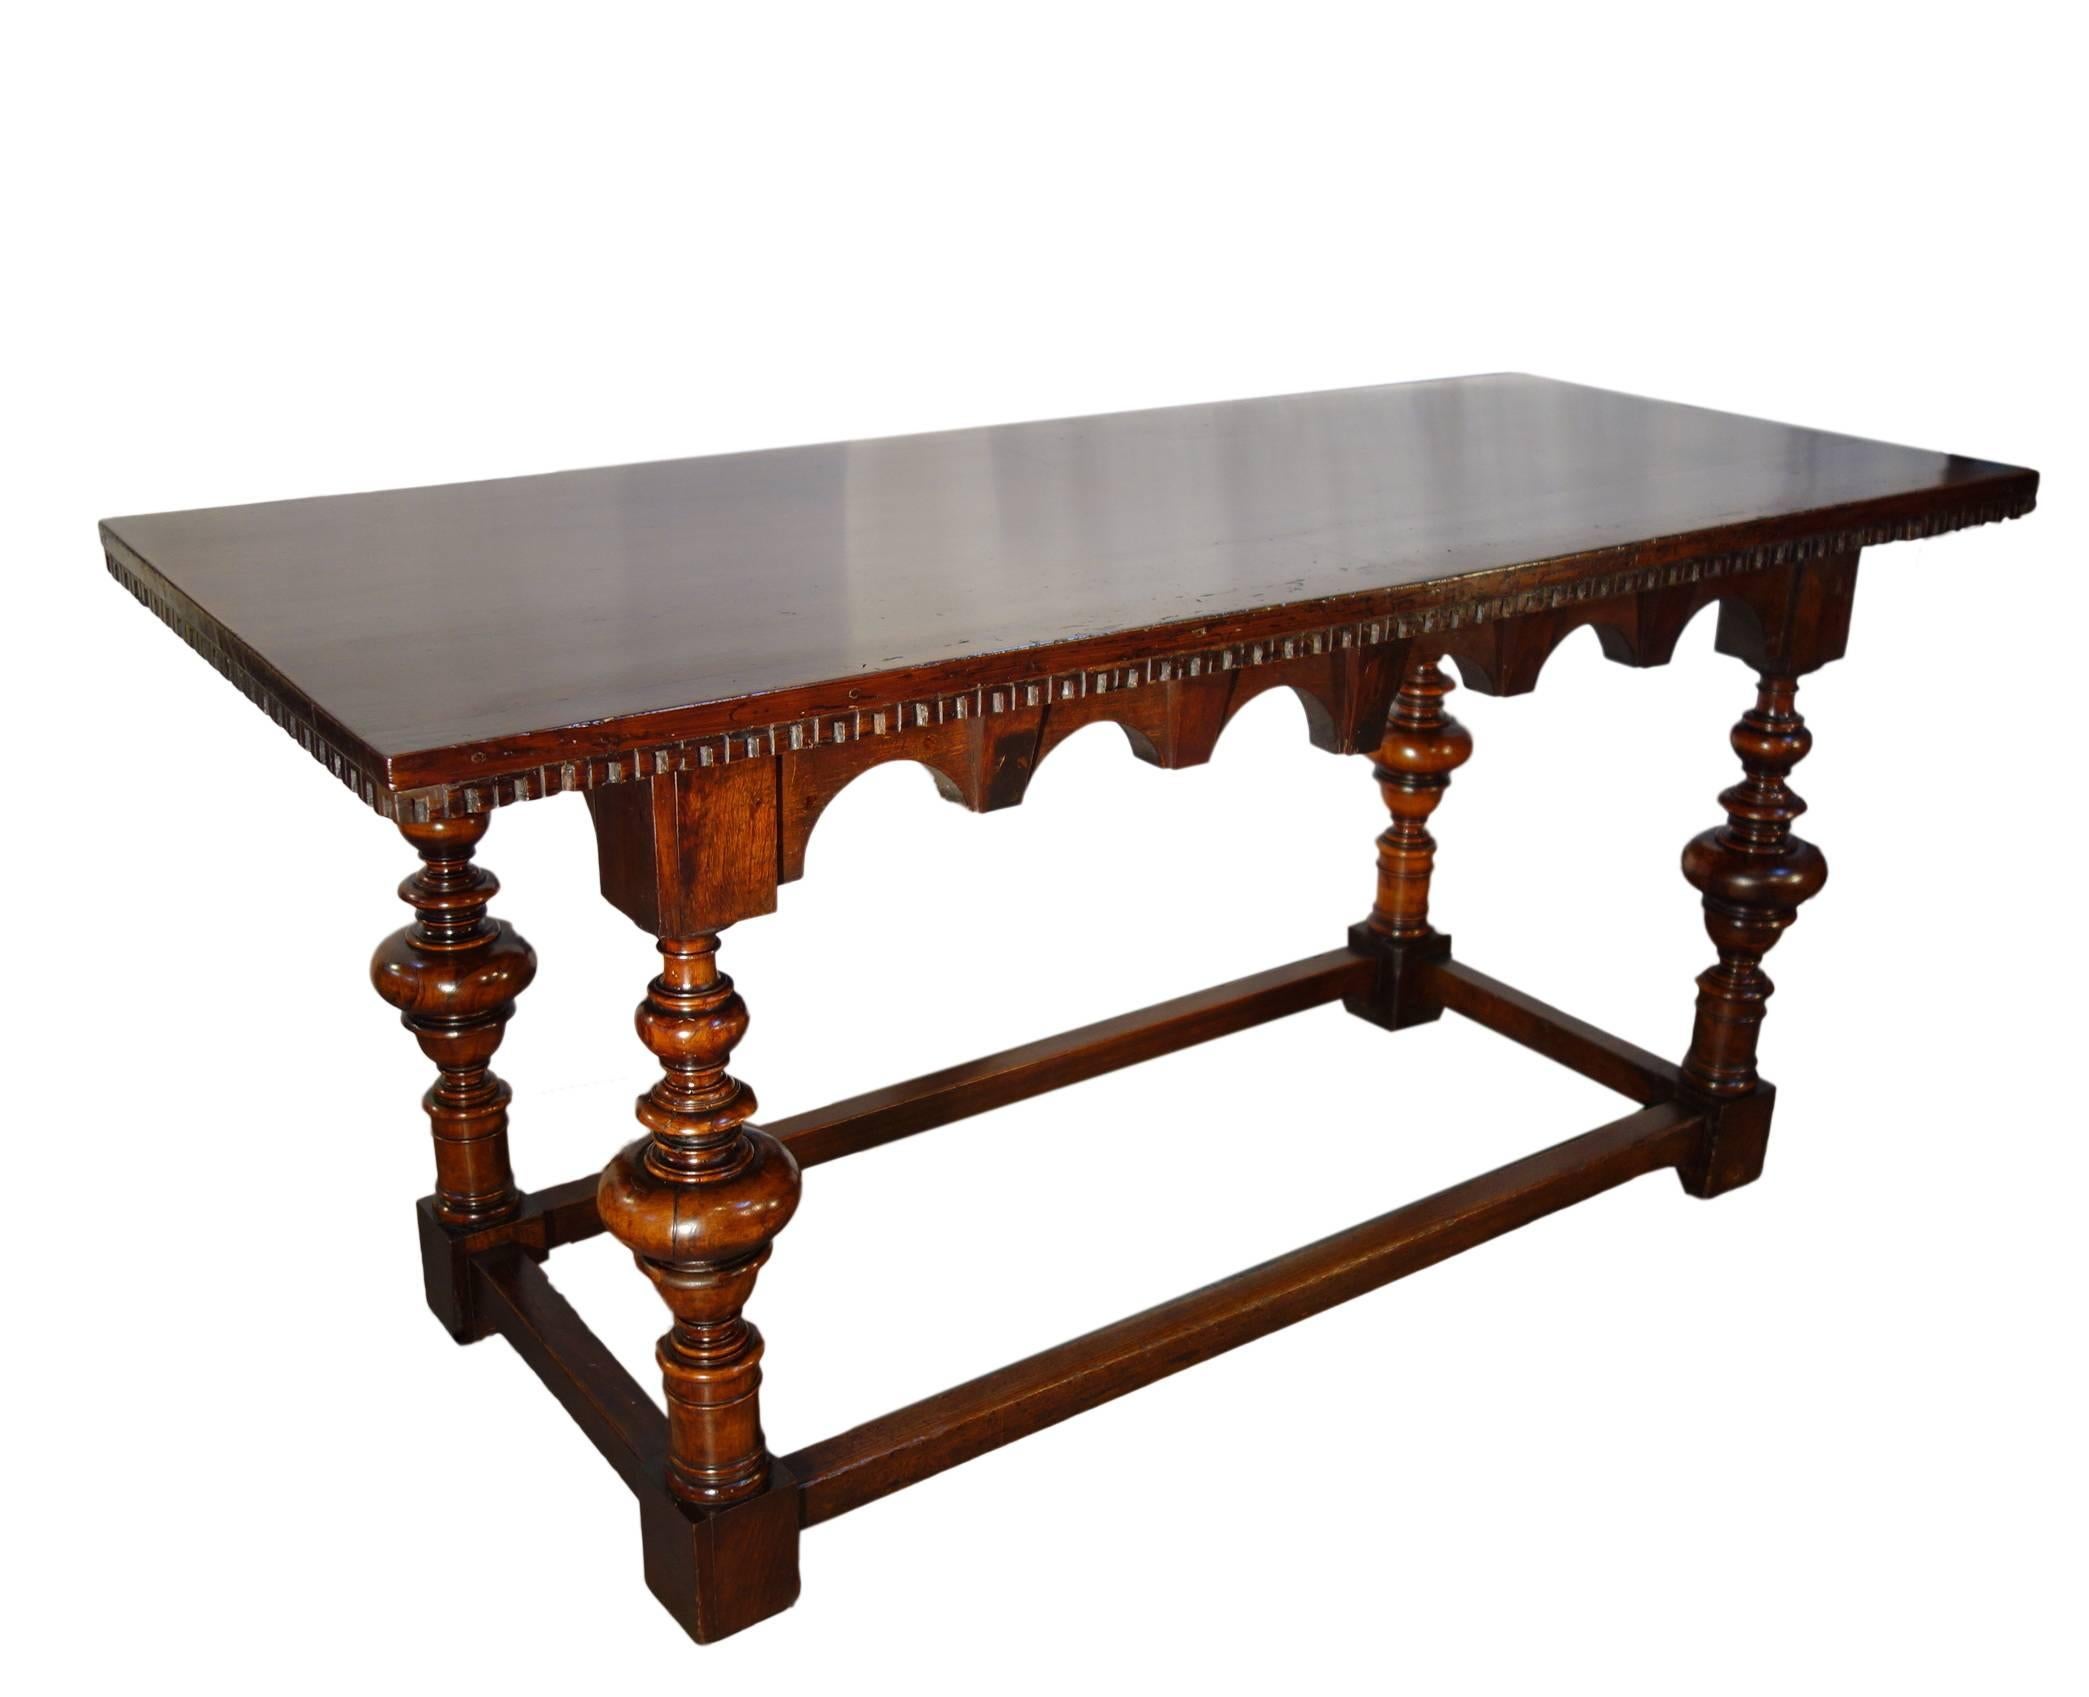 Finely handcrafted solid Italian walnut table of the Bologna style and origin with dentil edge, interesting architectural shaped apron, spool legs and straight stretchers. Nice scale and balance of contrasting forms. Well-preserved, rich patina,